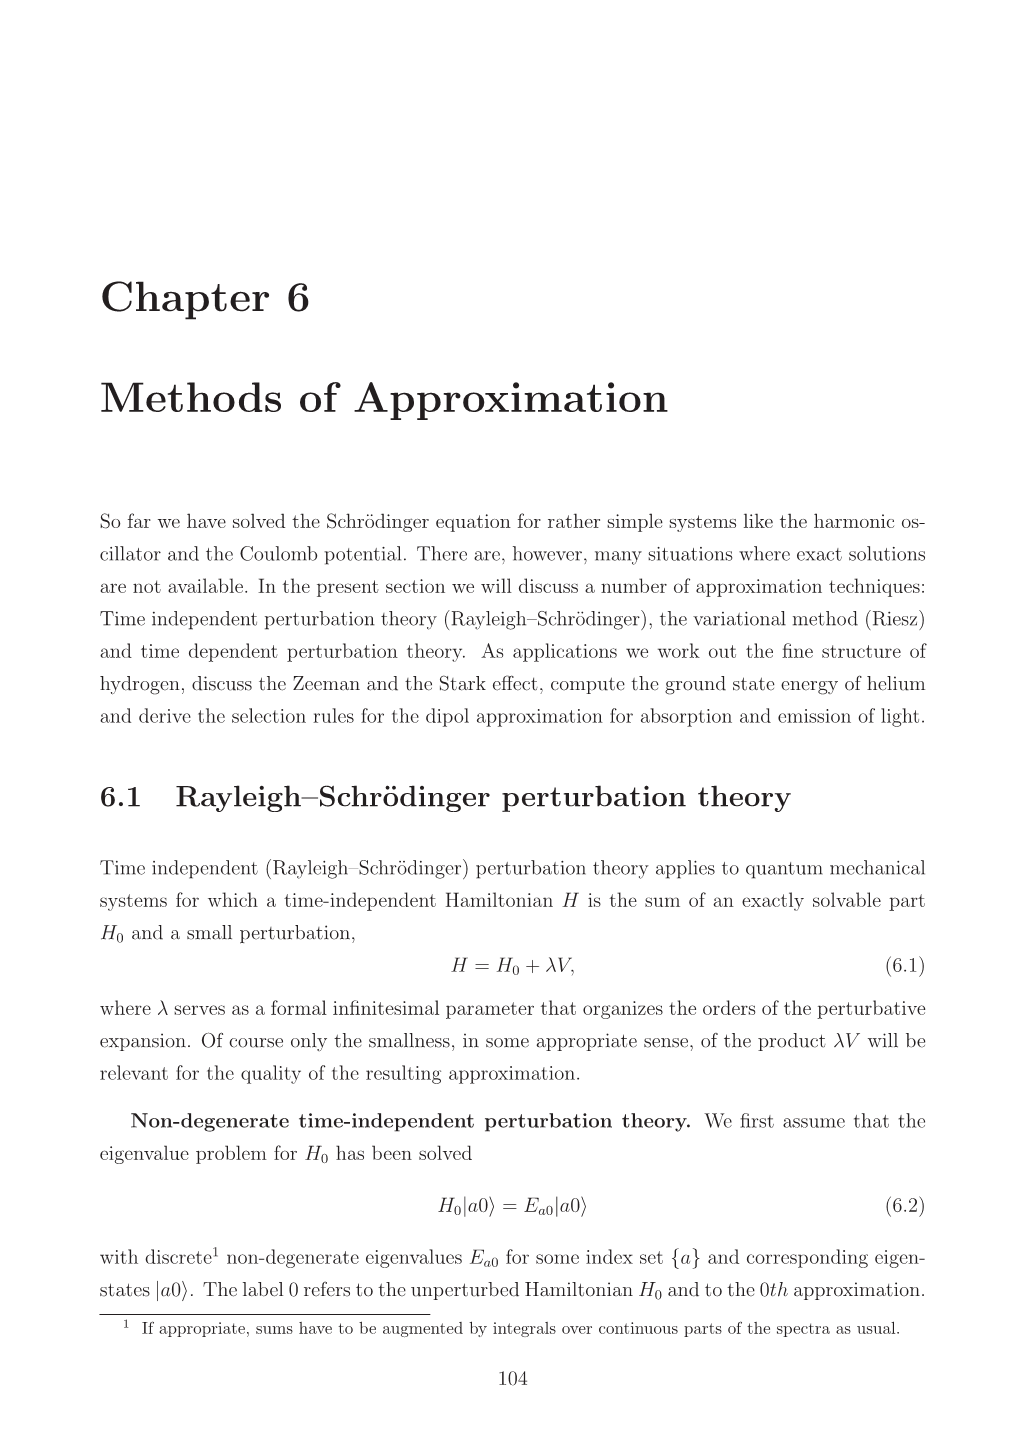 Chapter 6 Methods of Approximation